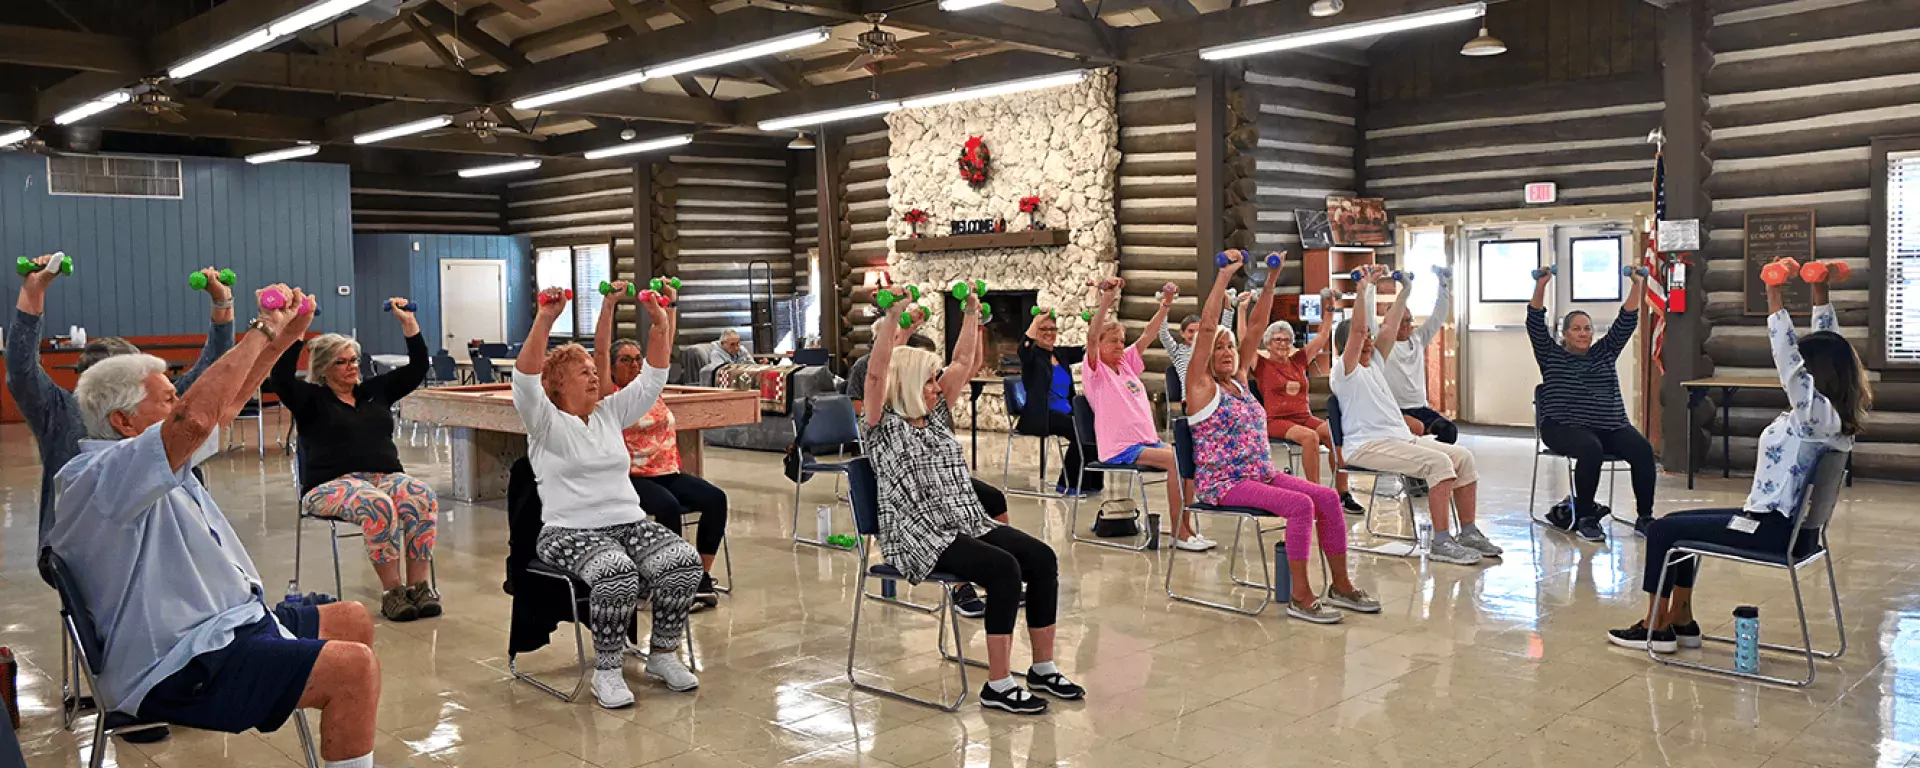 Image of a group of adults participating in a workout with weights chair class at the Log Cabin Senior Center in Jensen Beach, FL.